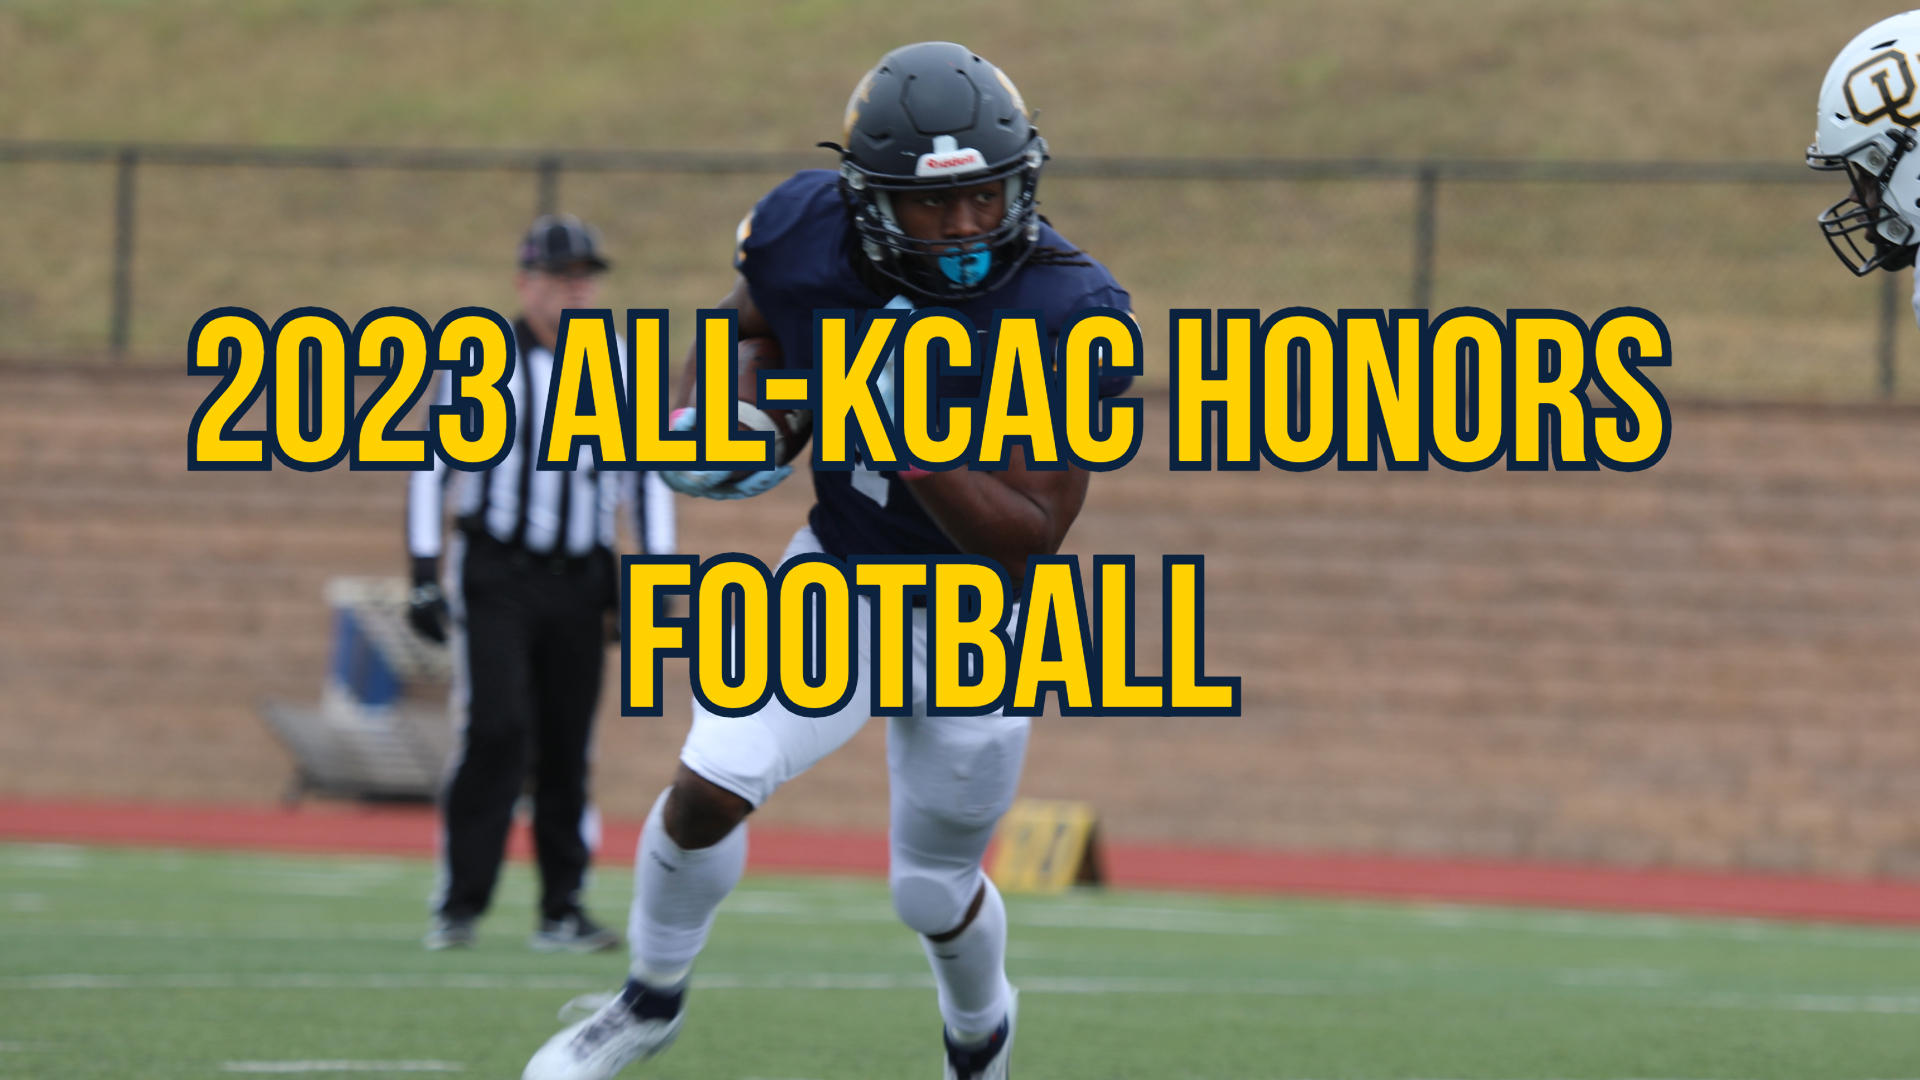 Nine Spires Receive All-KCAC Honors